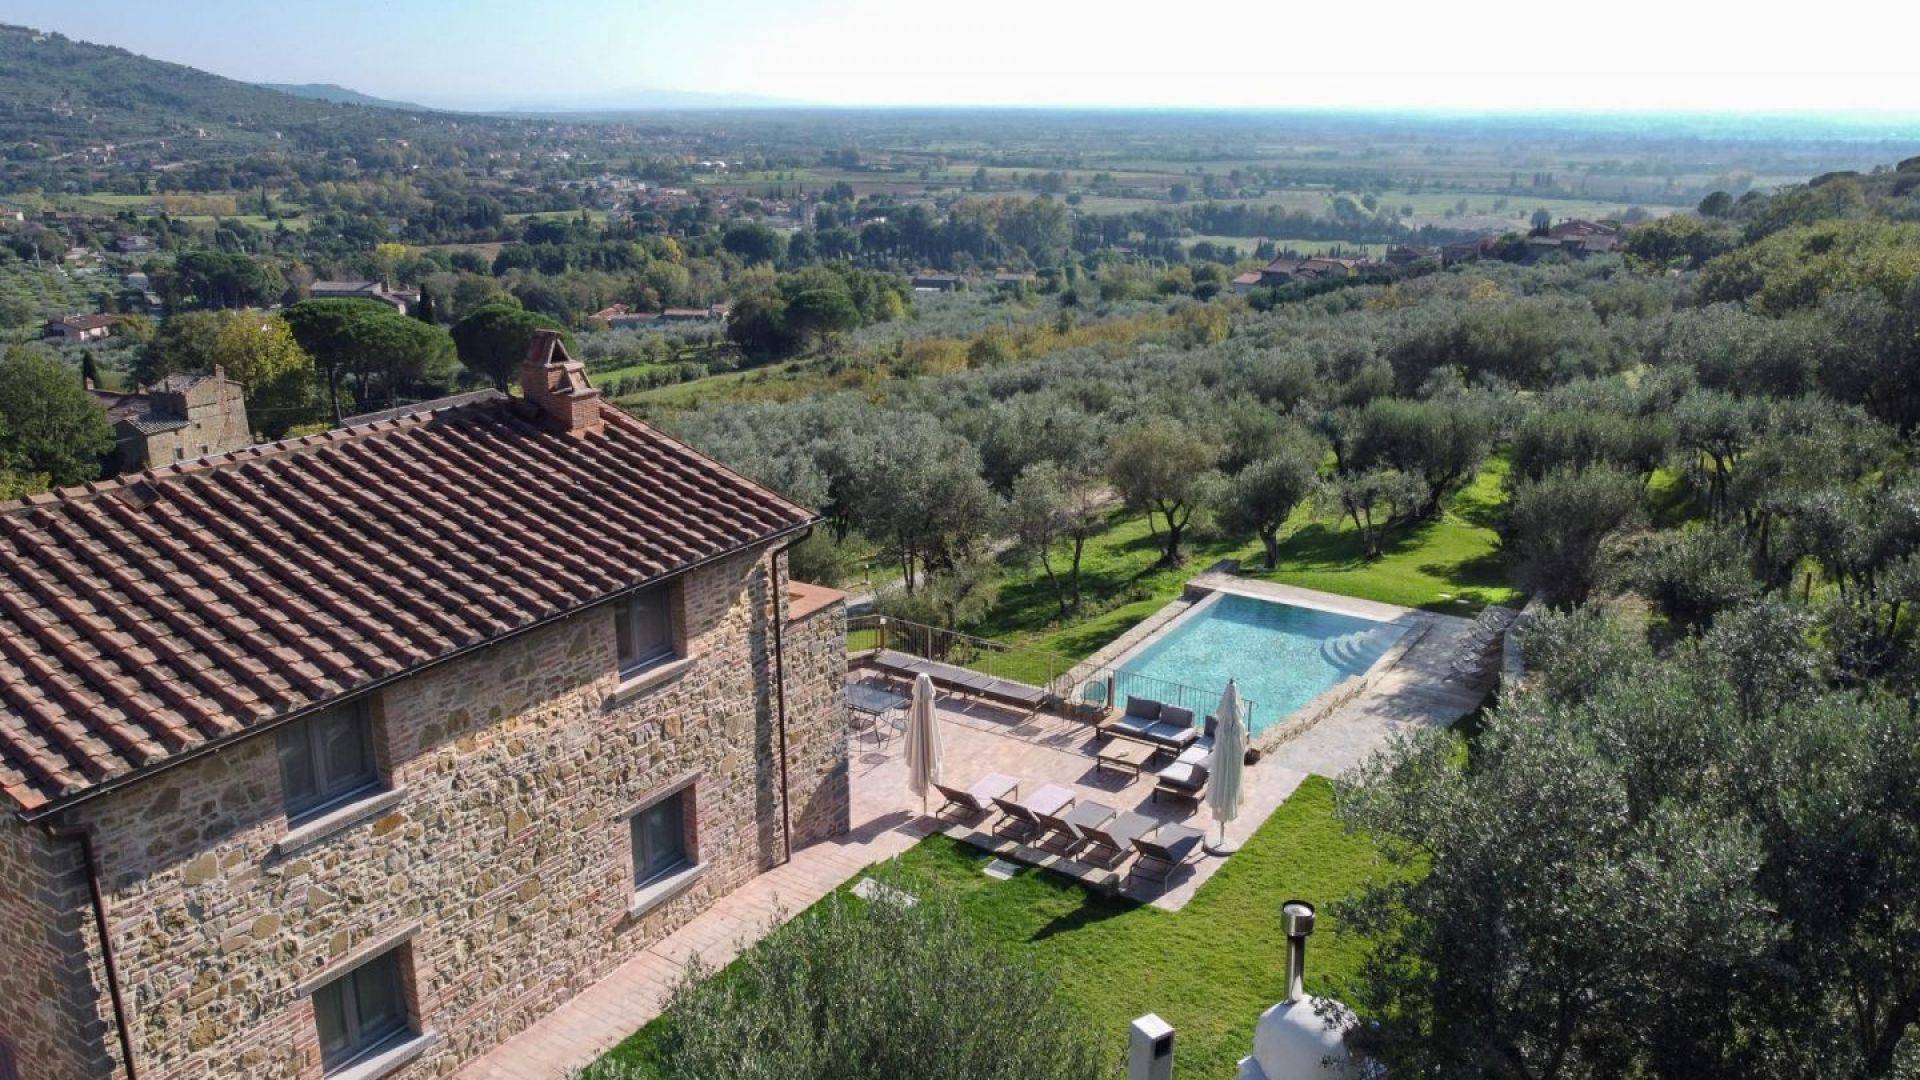 Scenic contemporary newly built 5-bedroom stone villa with olive grove and panoramic swimming pool, for sale in Cortona.